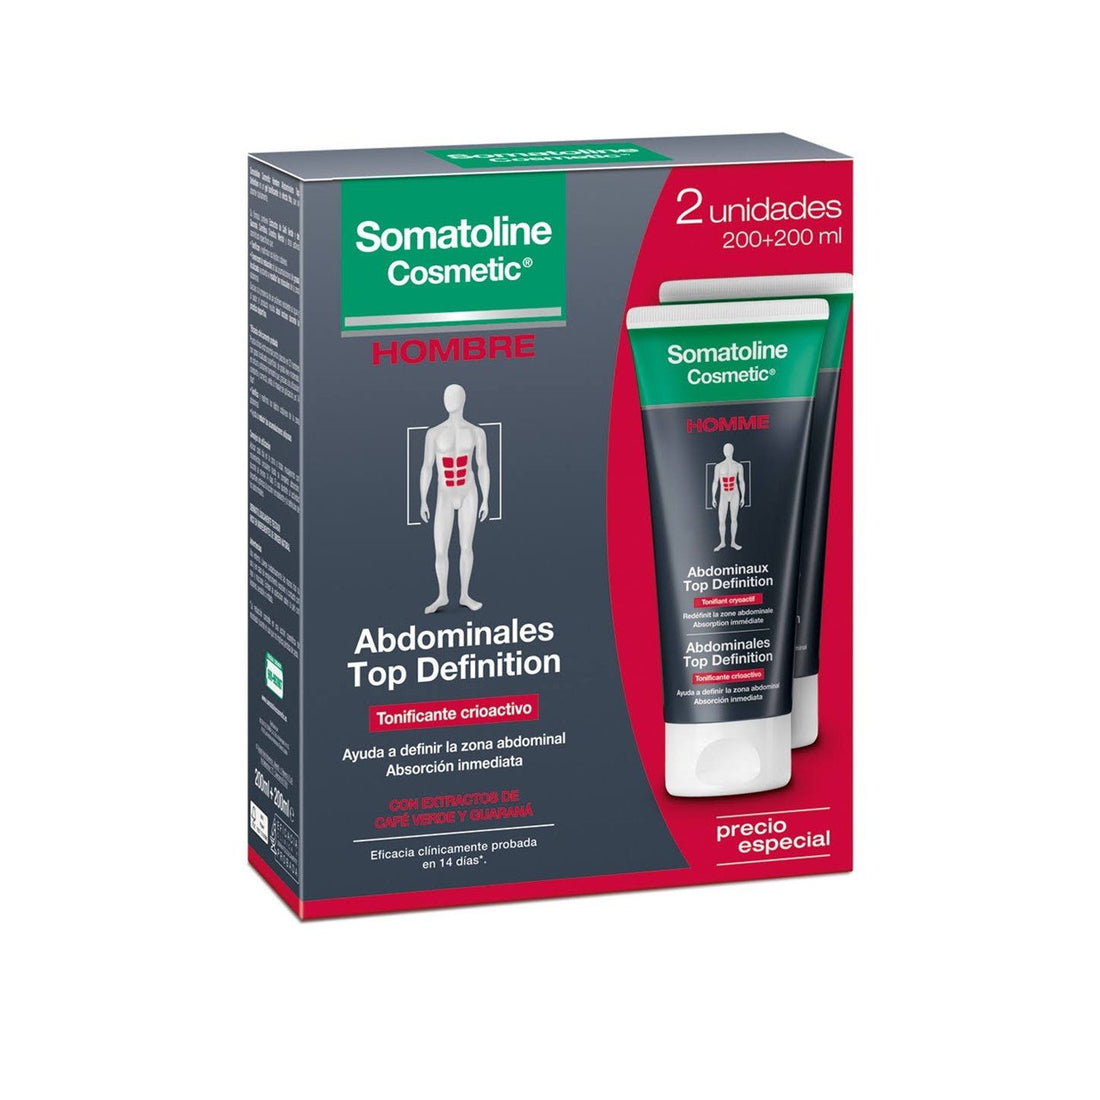 Somatoline Cosmetic Homme Abdominal Top Définition 200 ml x2 Pack Promo